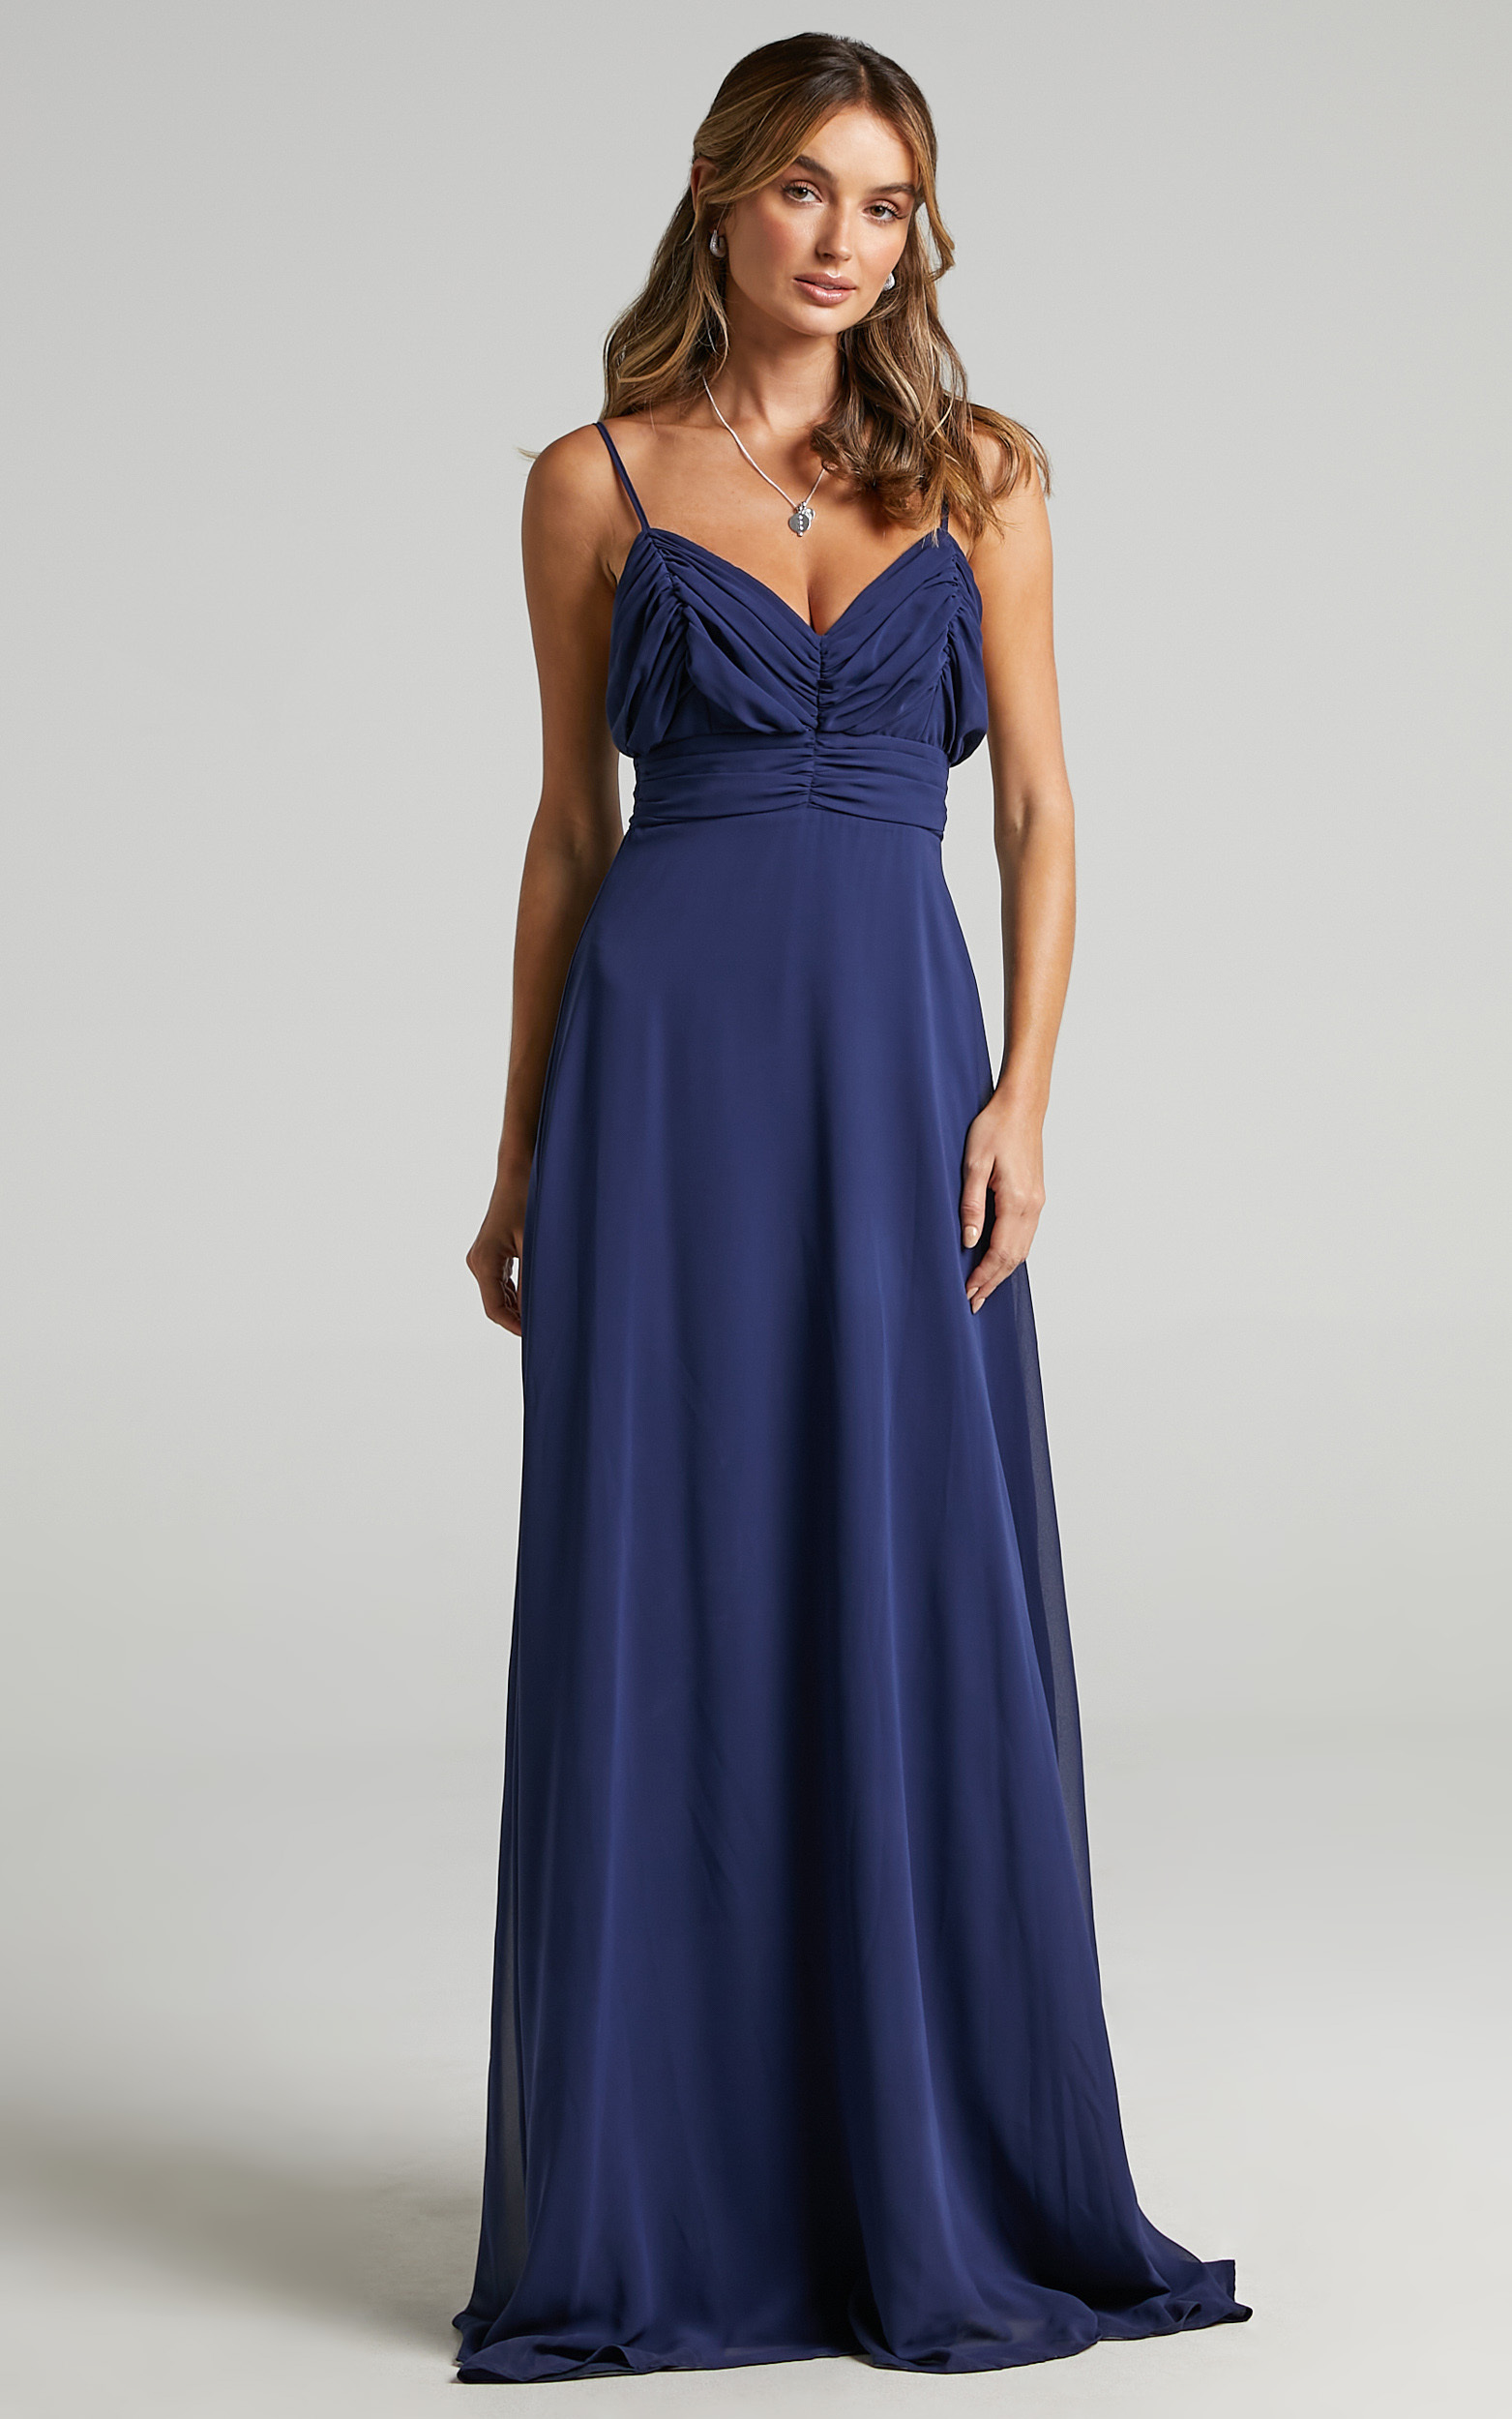 Just One Dance Dress in Navy - 06, NVY1, hi-res image number null